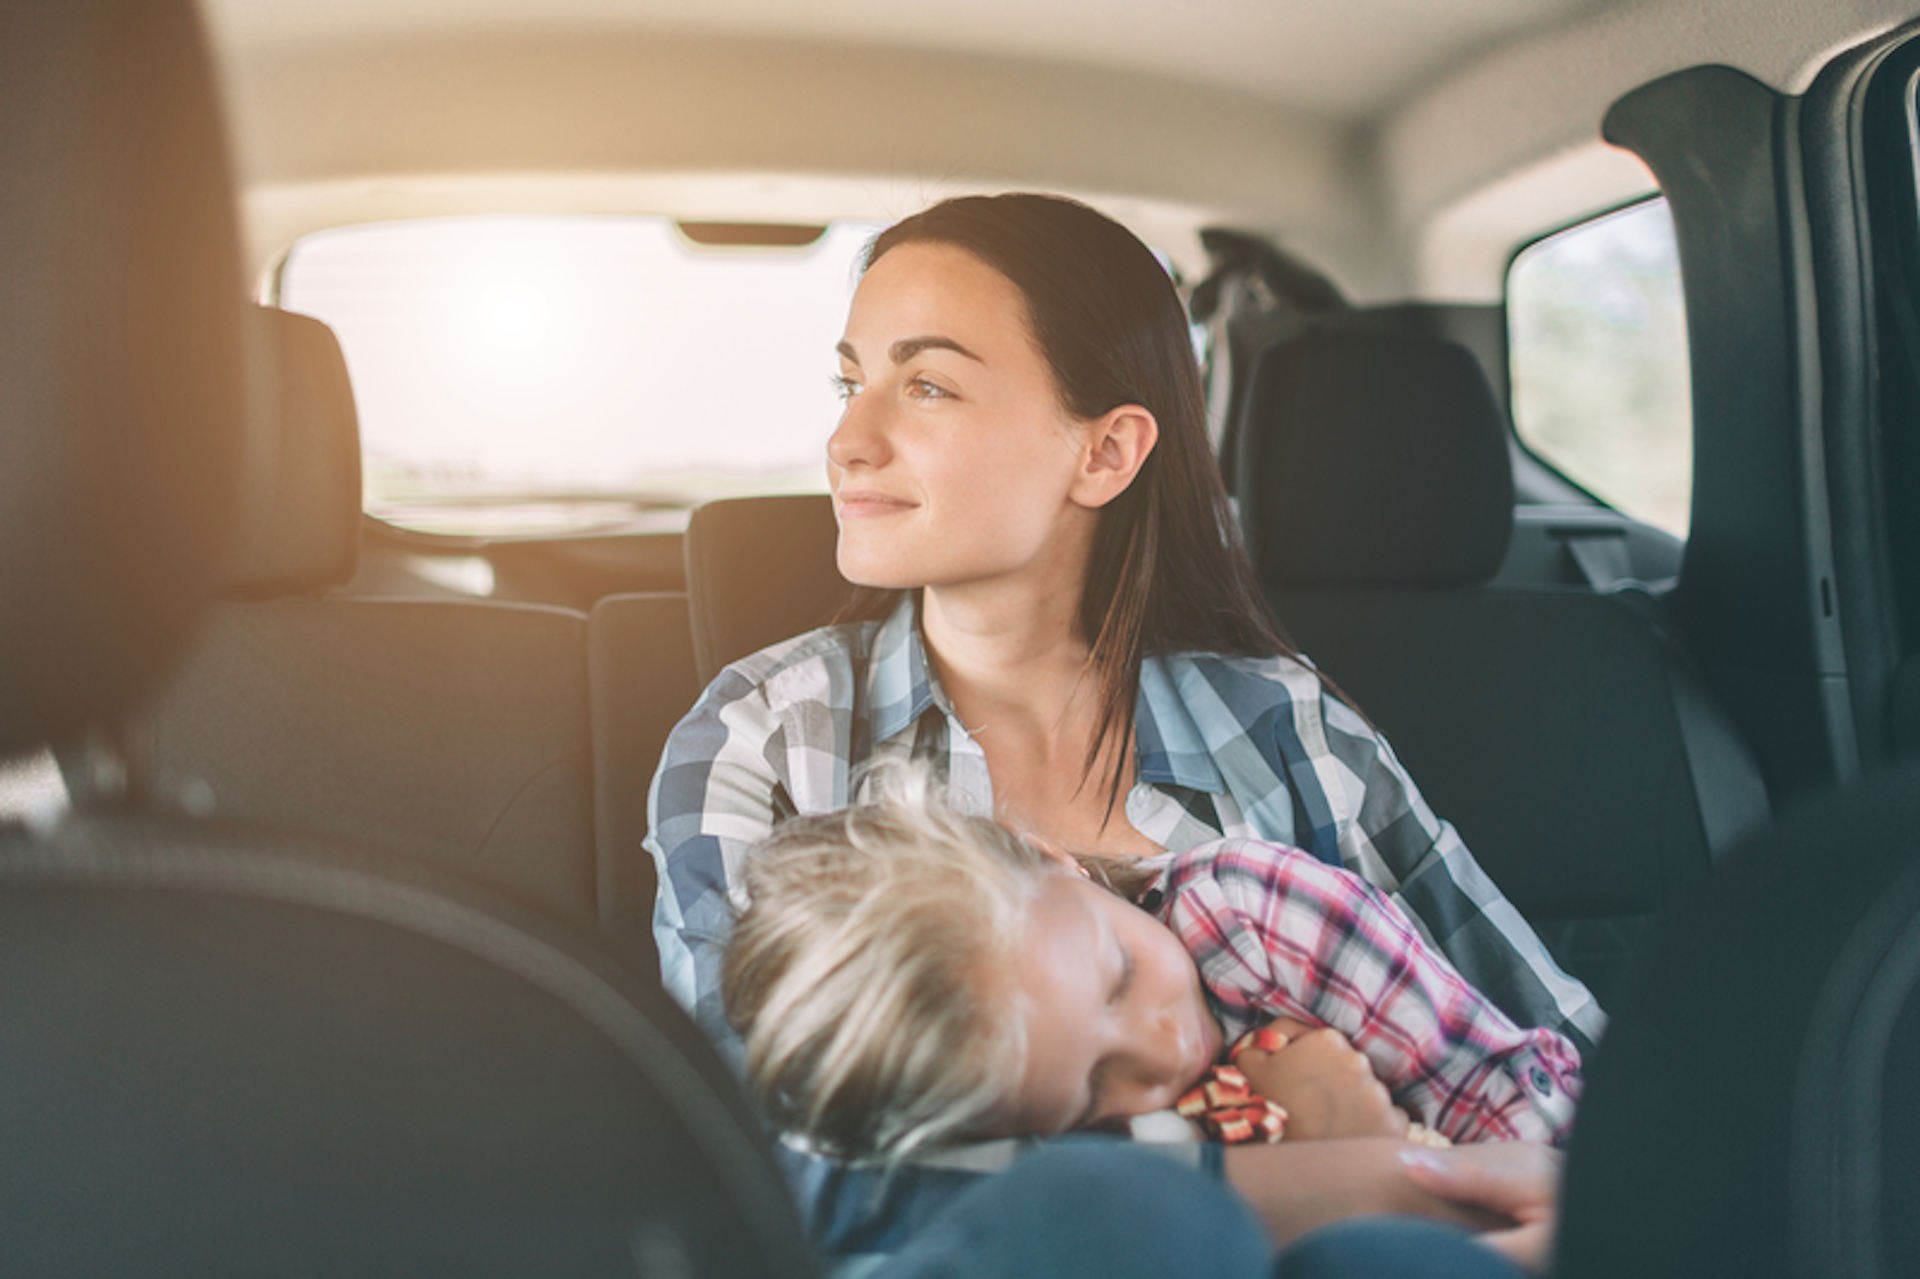 Get the Family Ready for These Road Trips - Wherever Family